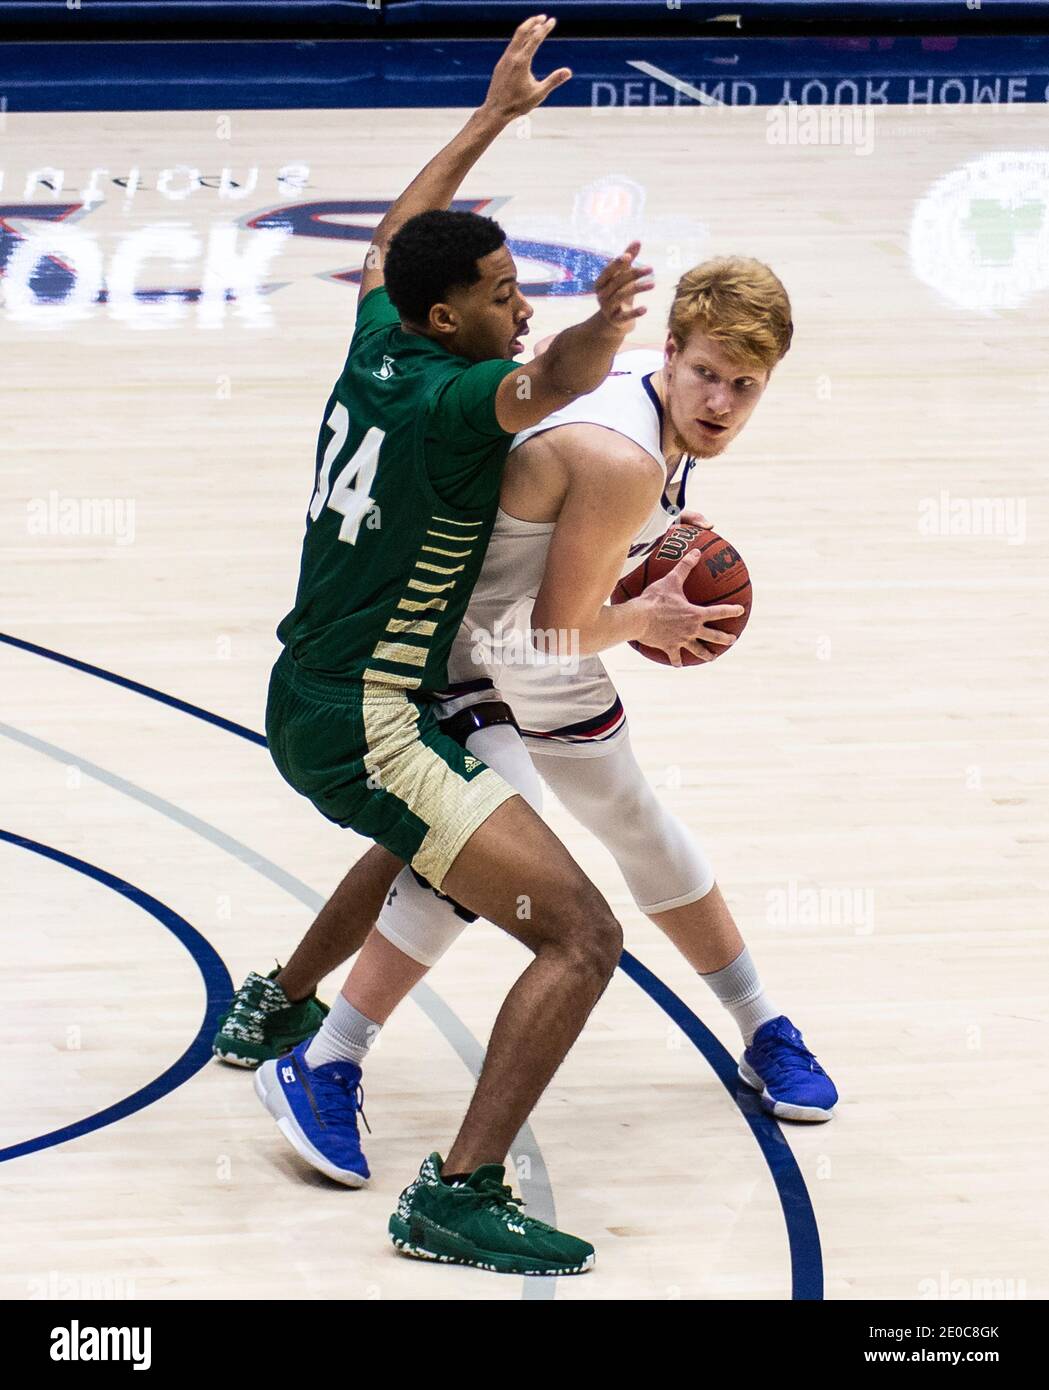 Moraga, CA U.S. 30th Dec, 2020. A. St. Mary's Gaels forward Matthias Tass (11) looks to pass the ball during the NCAA Men's Basketball game between Sacramento State Hornets and the Saint Mary's Gaels 63-45 win at McKeon Pavilion Moraga Calif. Thurman James/CSM/Alamy Live News Stock Photo